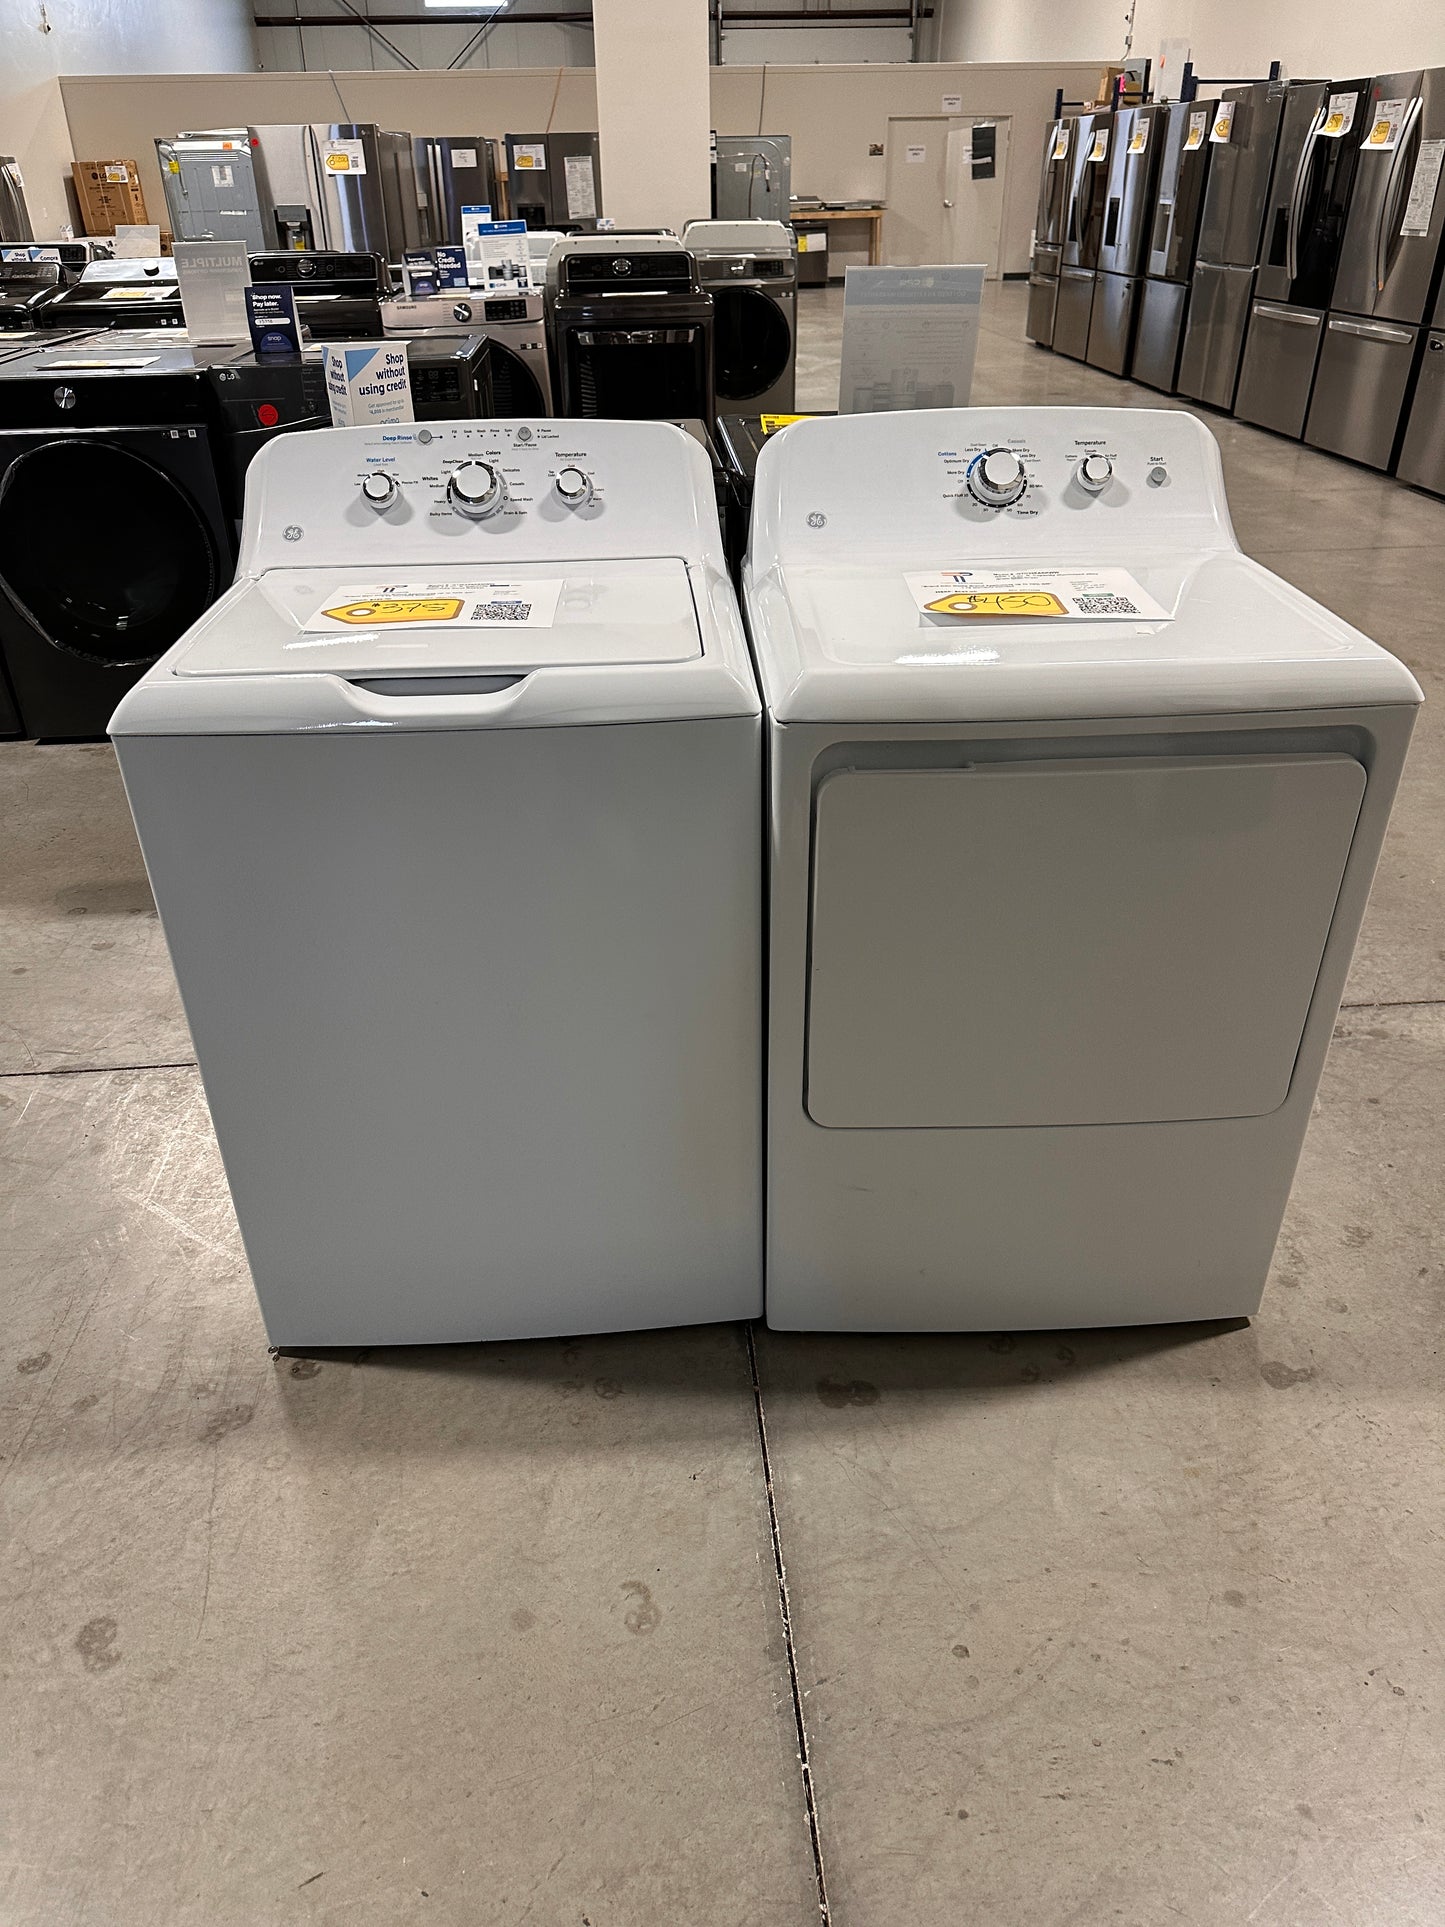 GREAT NEW GE TOP LOAD WASHER GAS DRYER LAUNDRY SET - WAS13201 DRY12308